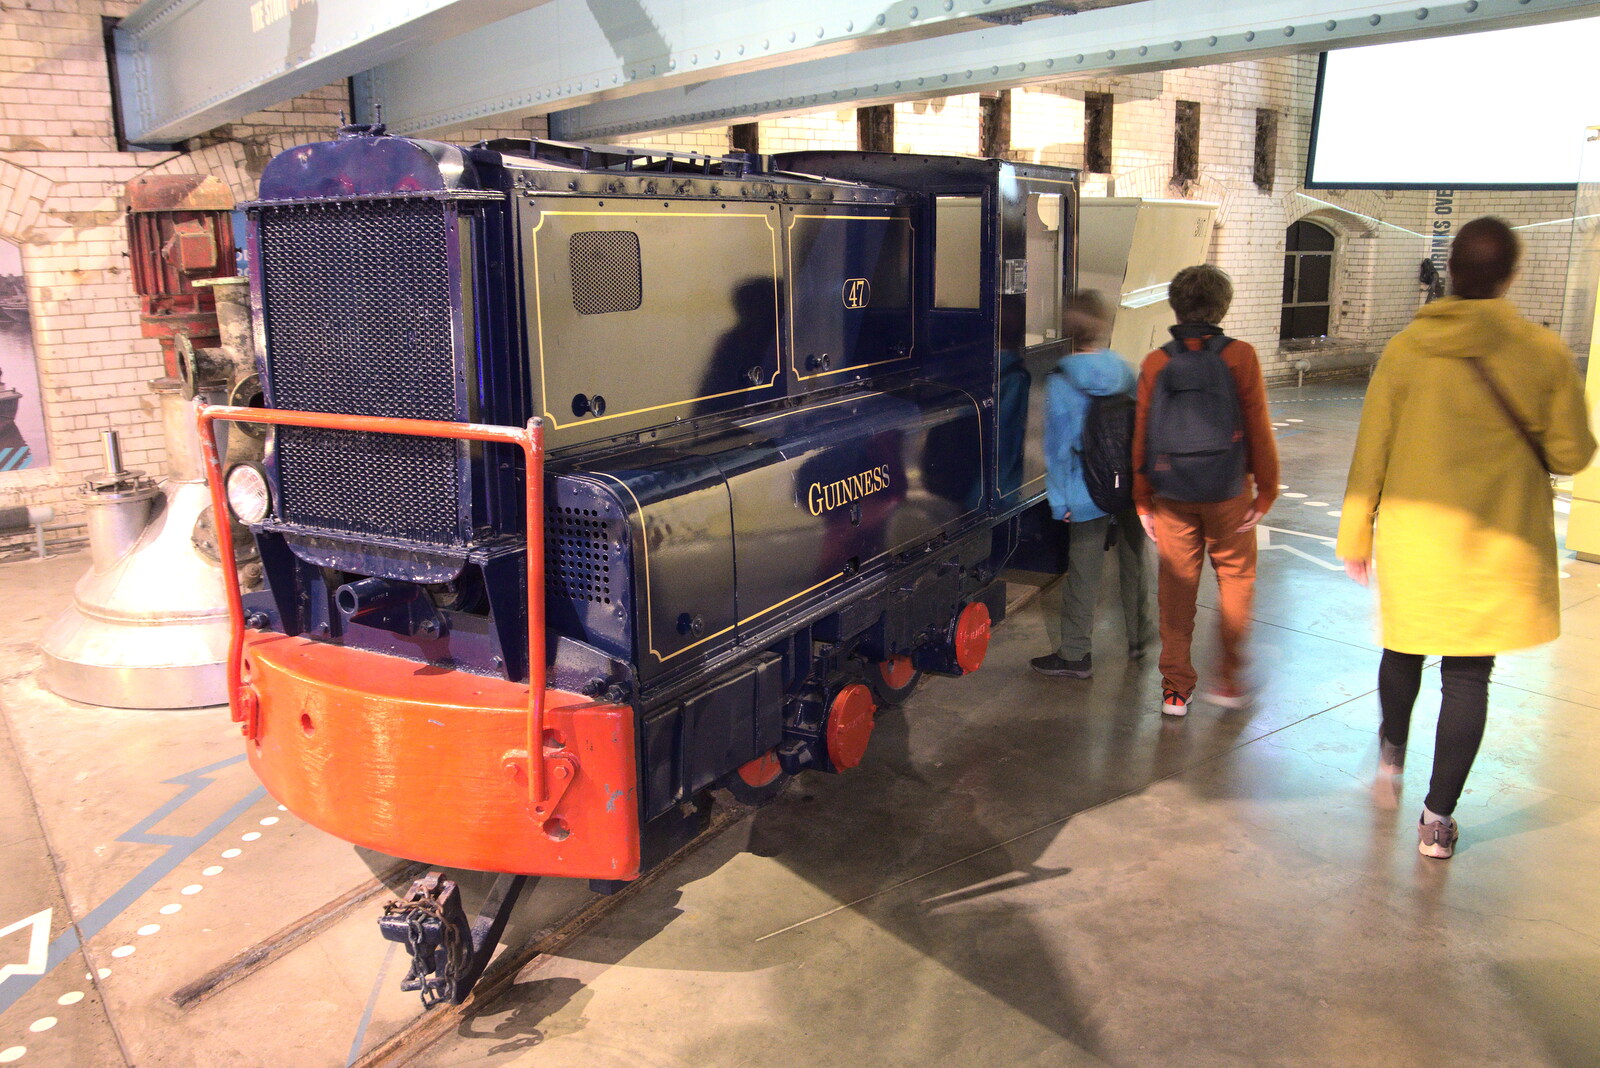 An old shunting diesel loco from The Guinness Storehouse Tour, St. James's Gate, Dublin, Ireland - 17th August 2021